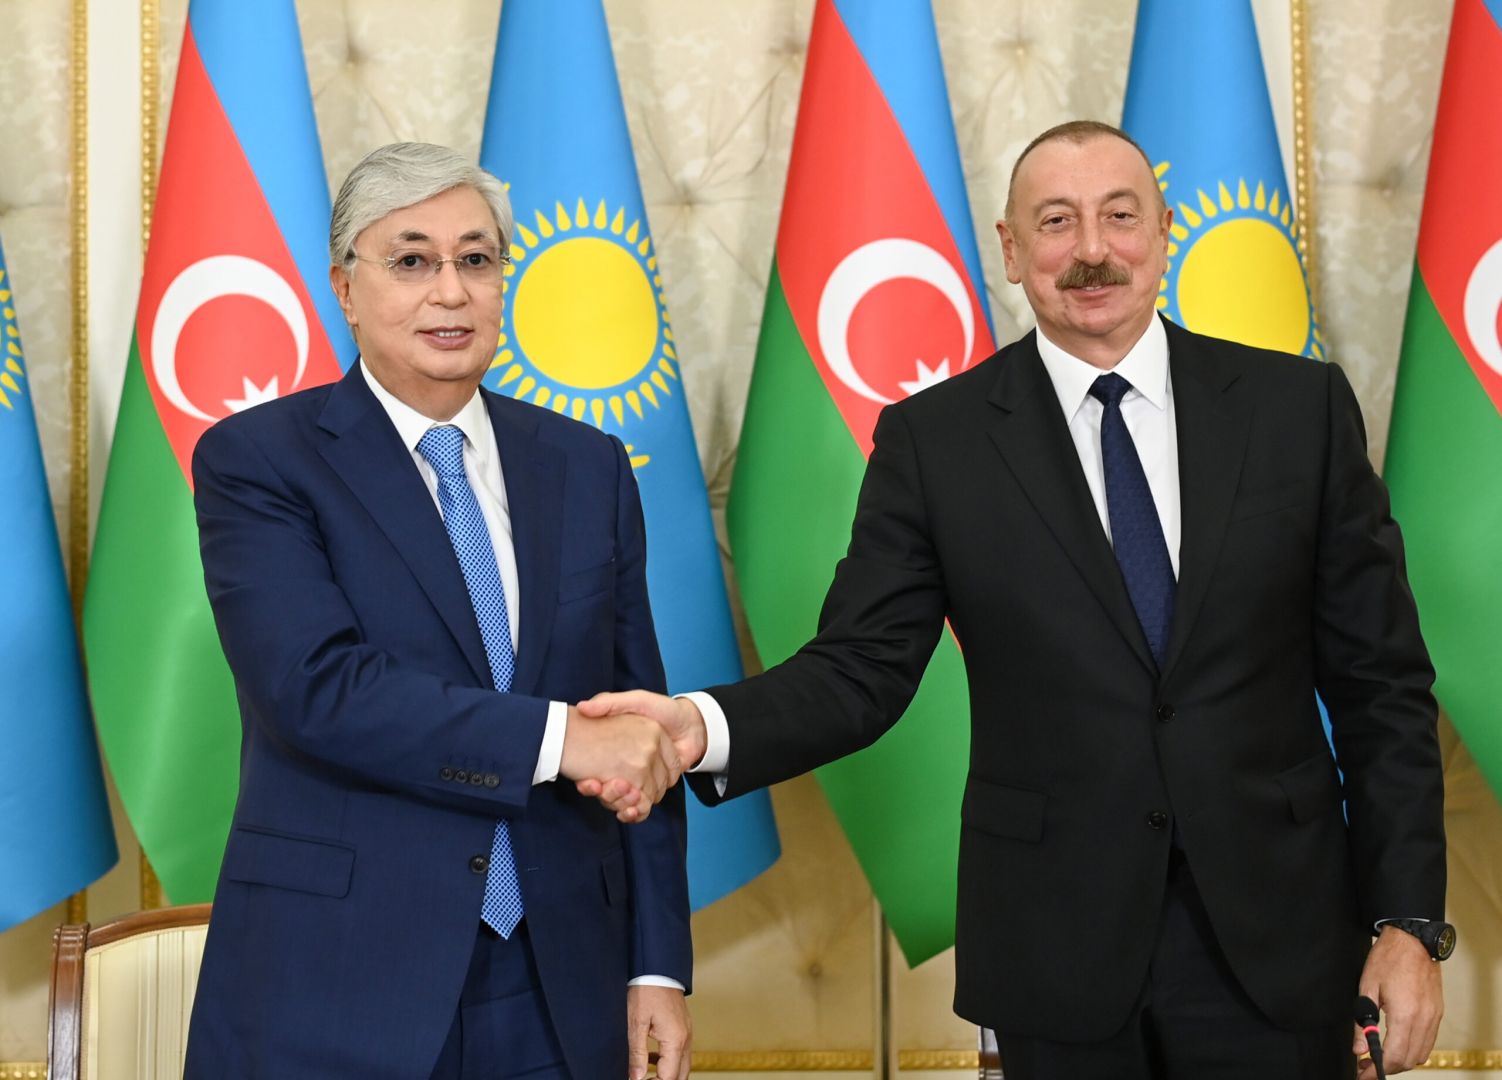 Tenacious & strong-willed to re-discover Central Asian nations, Azerbaijan uplifting ties to new heights